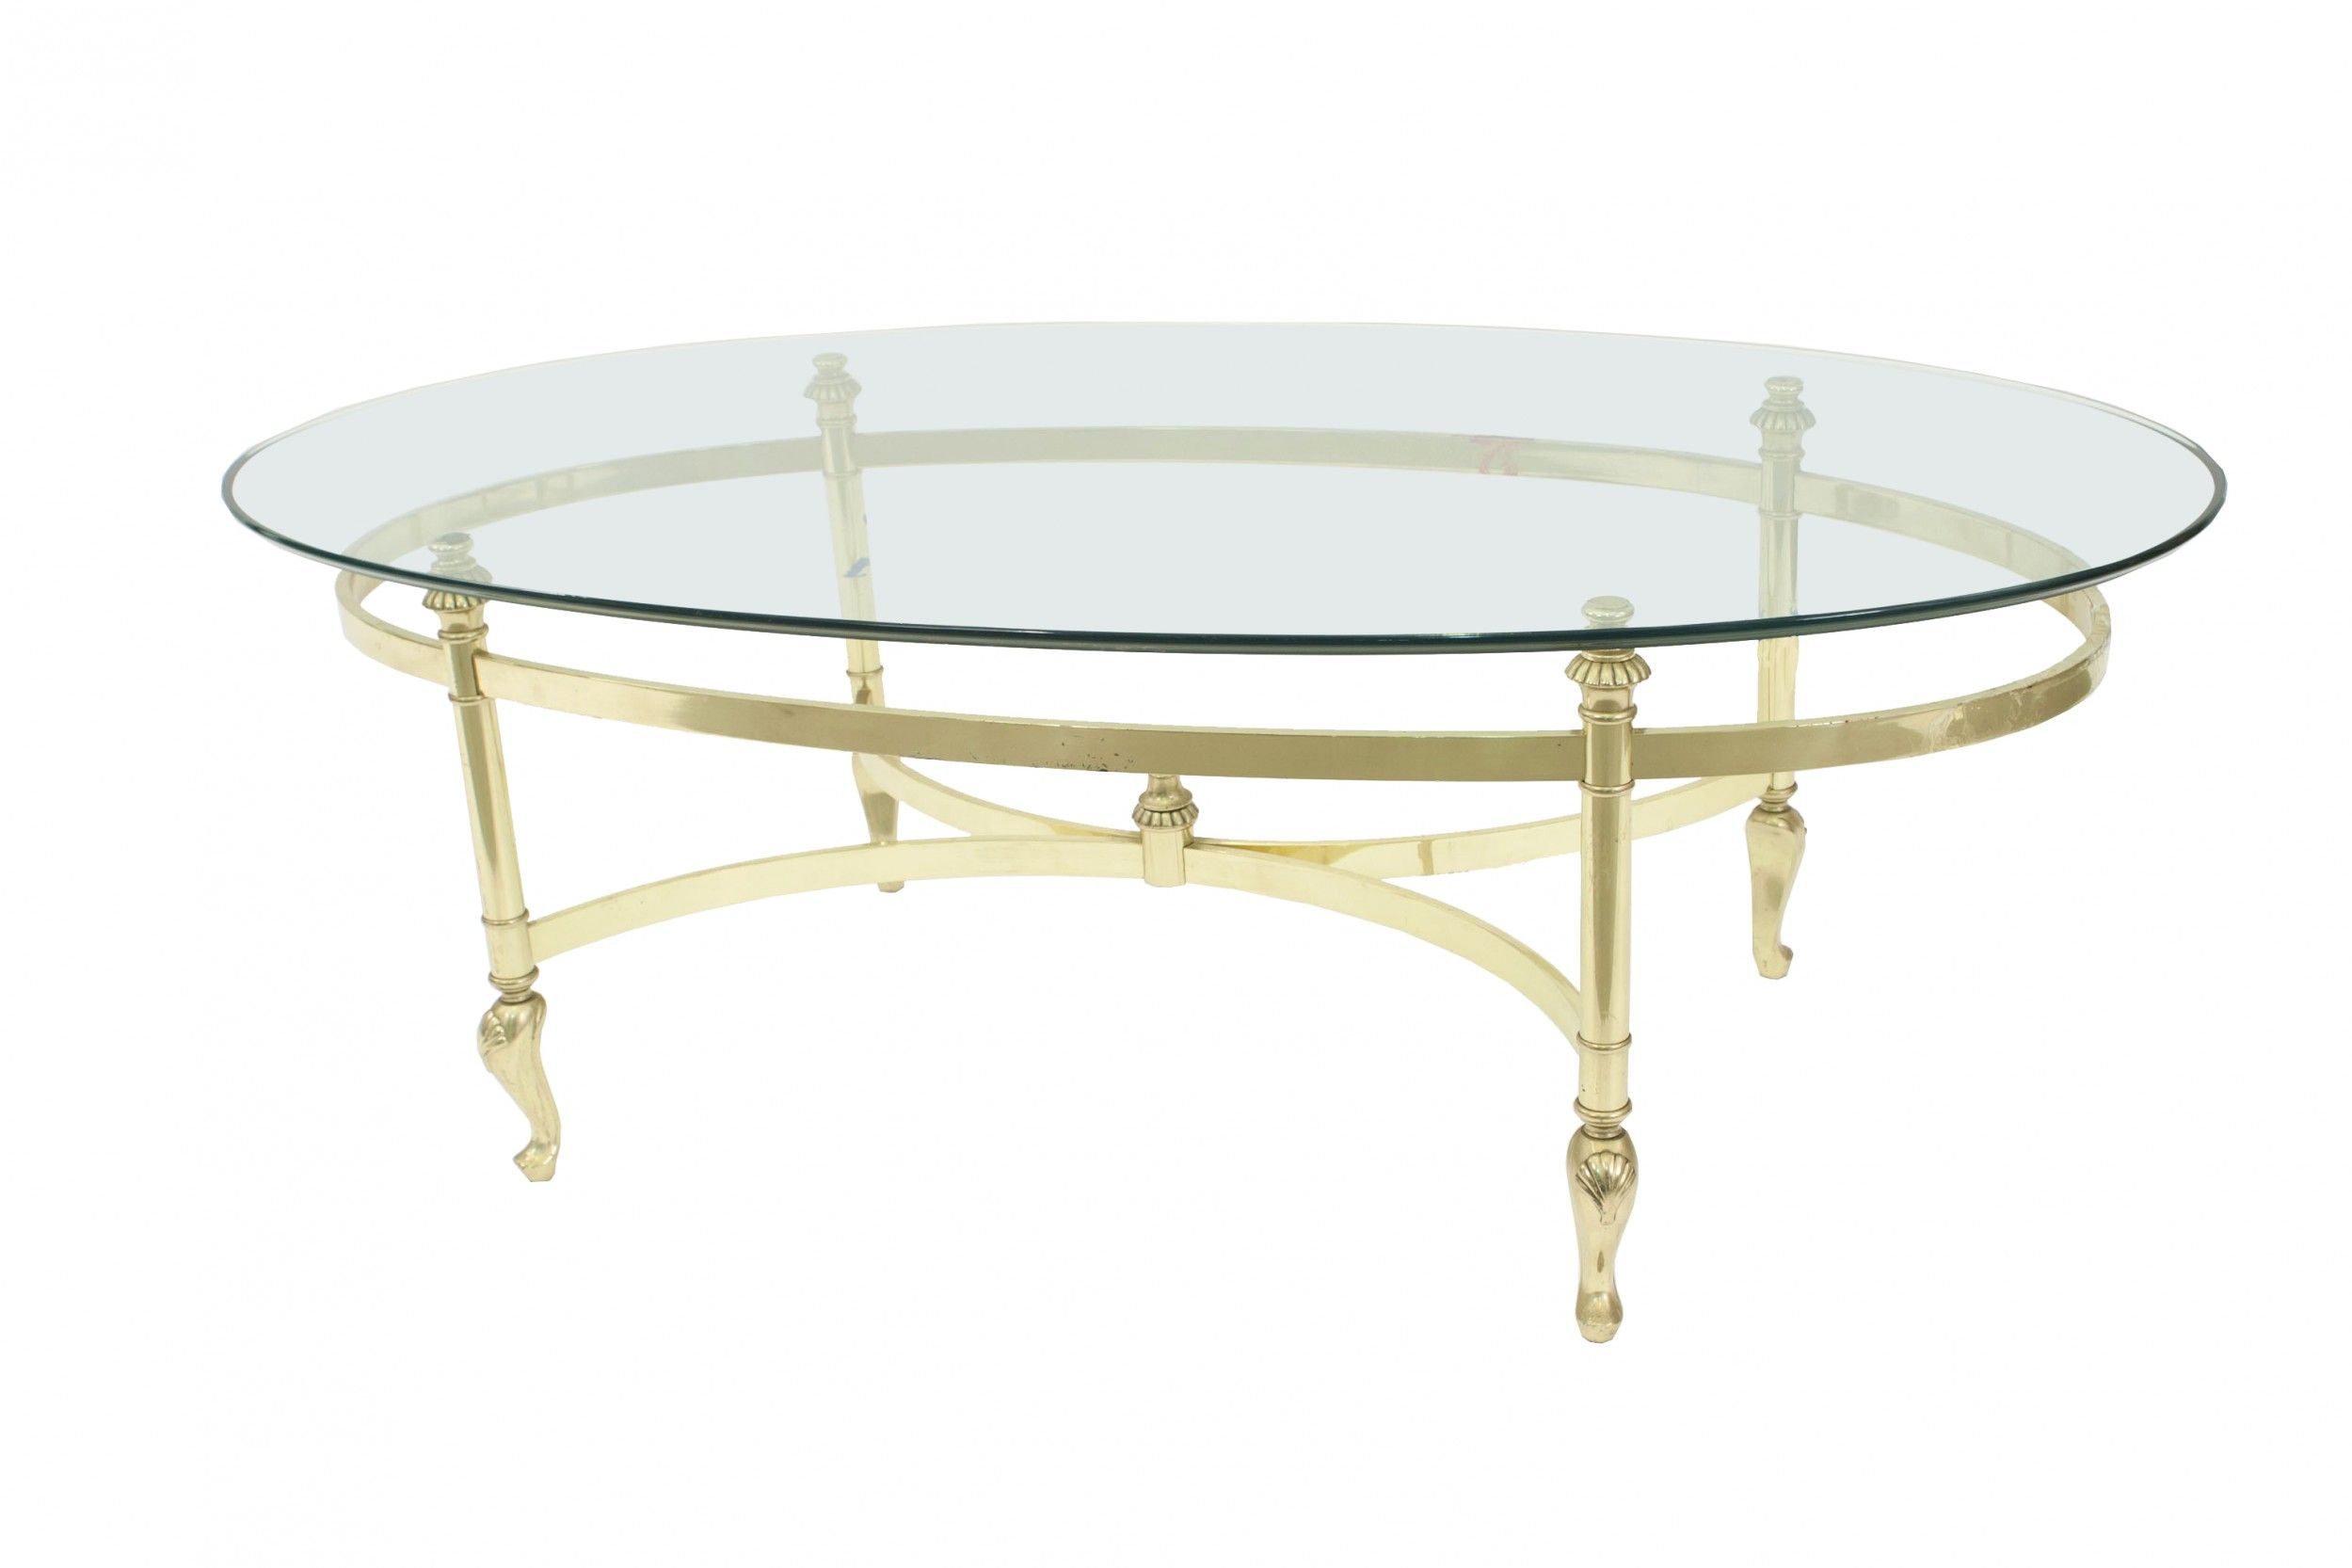 Contemporary Brass And Glass Coffee Table With Oval Glass Coffee Tables (View 9 of 15)